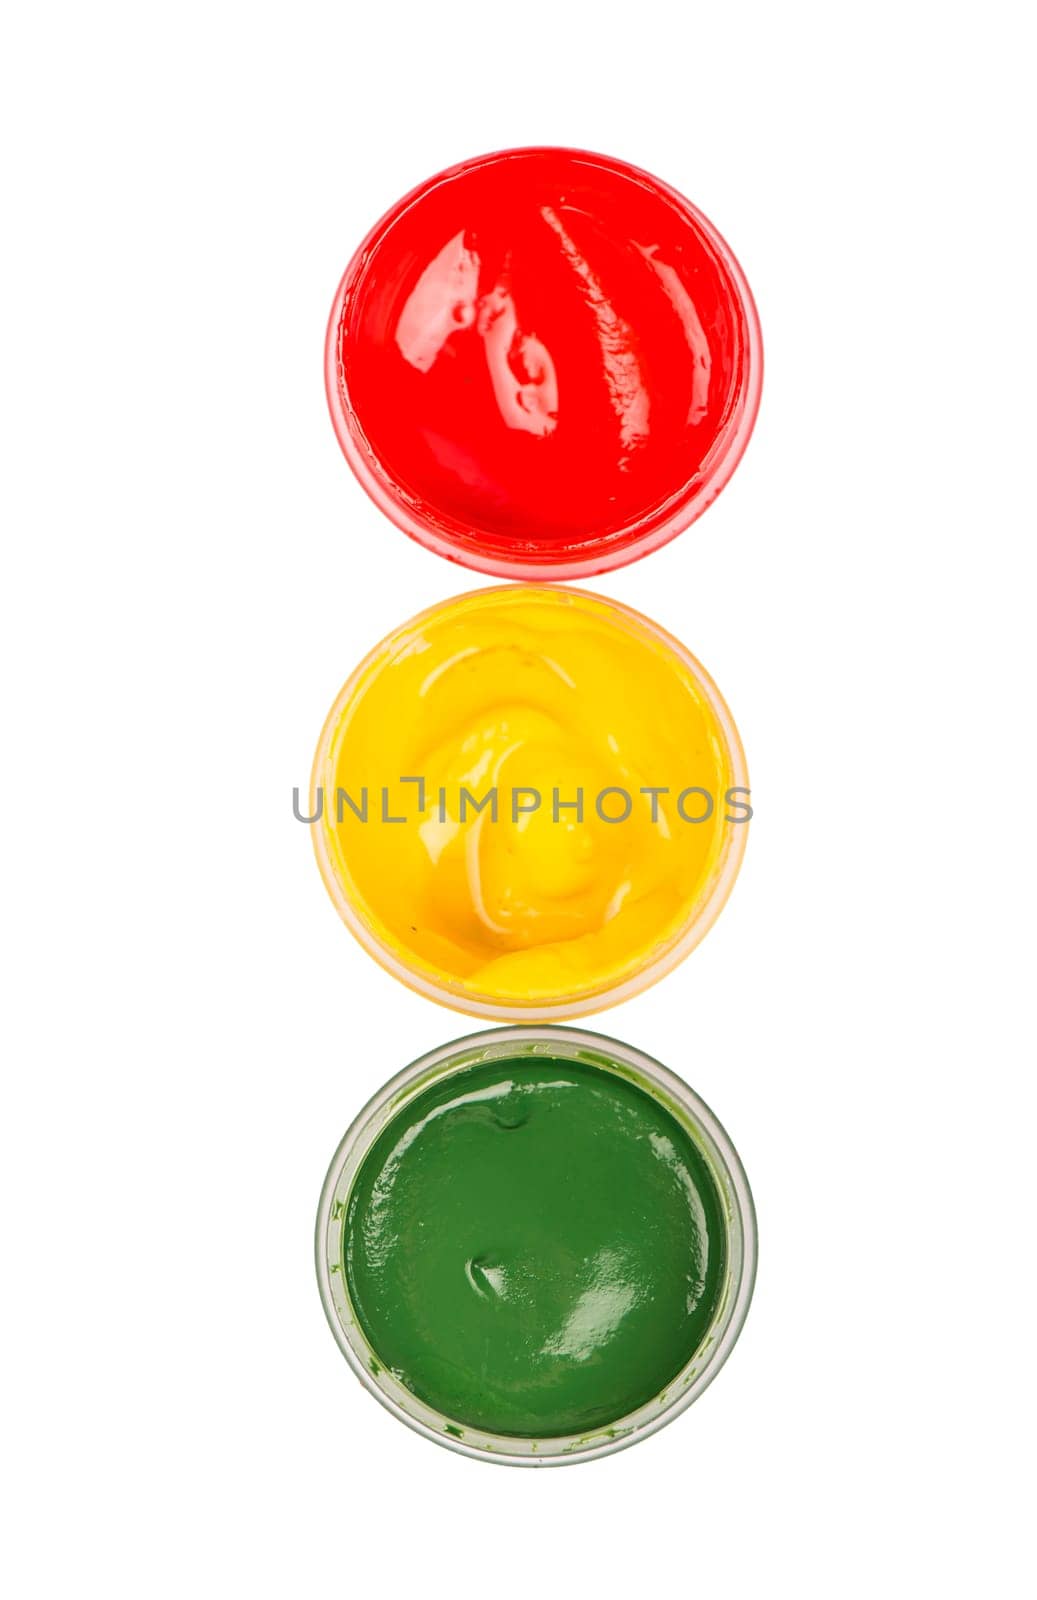 We draw a traffic light. Traffic light symbol of the rules of the road. Opened three cans with paint like a traffic light isolated on a white background by aprilphoto